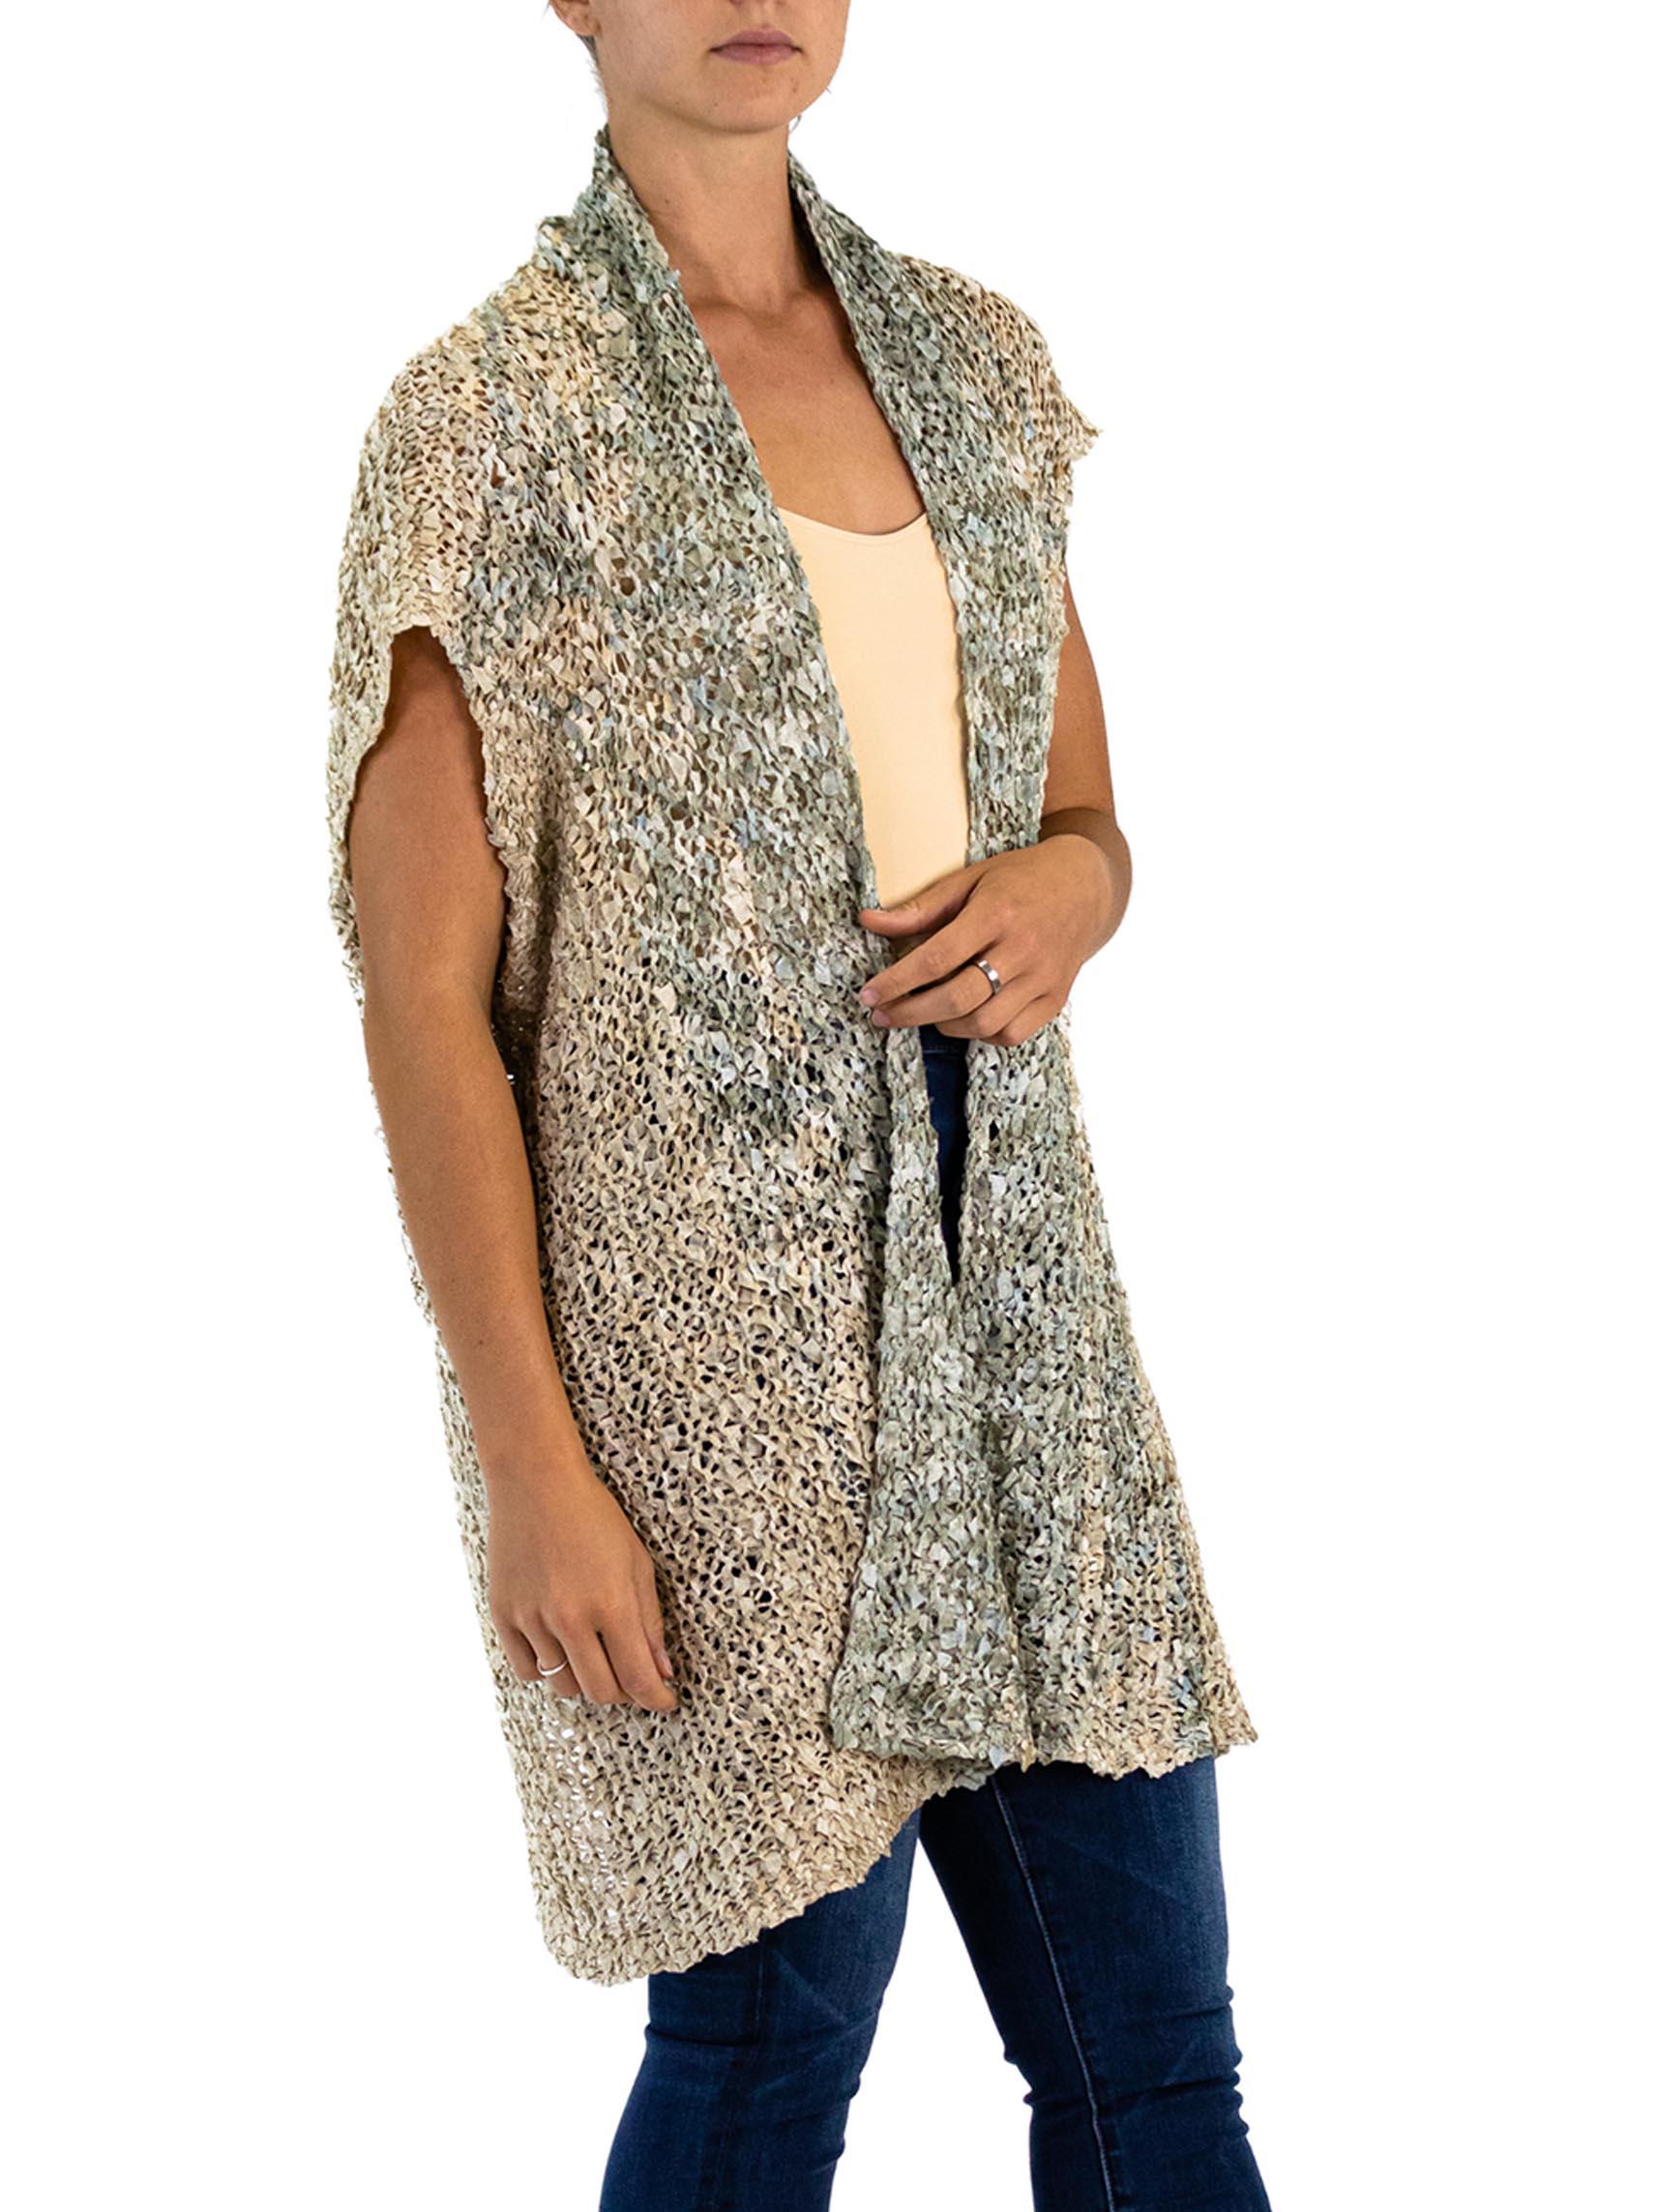 1990S DONNA KARAN Oyster Grey Silk Knit Pale Ombre Cardigan For Sale 2